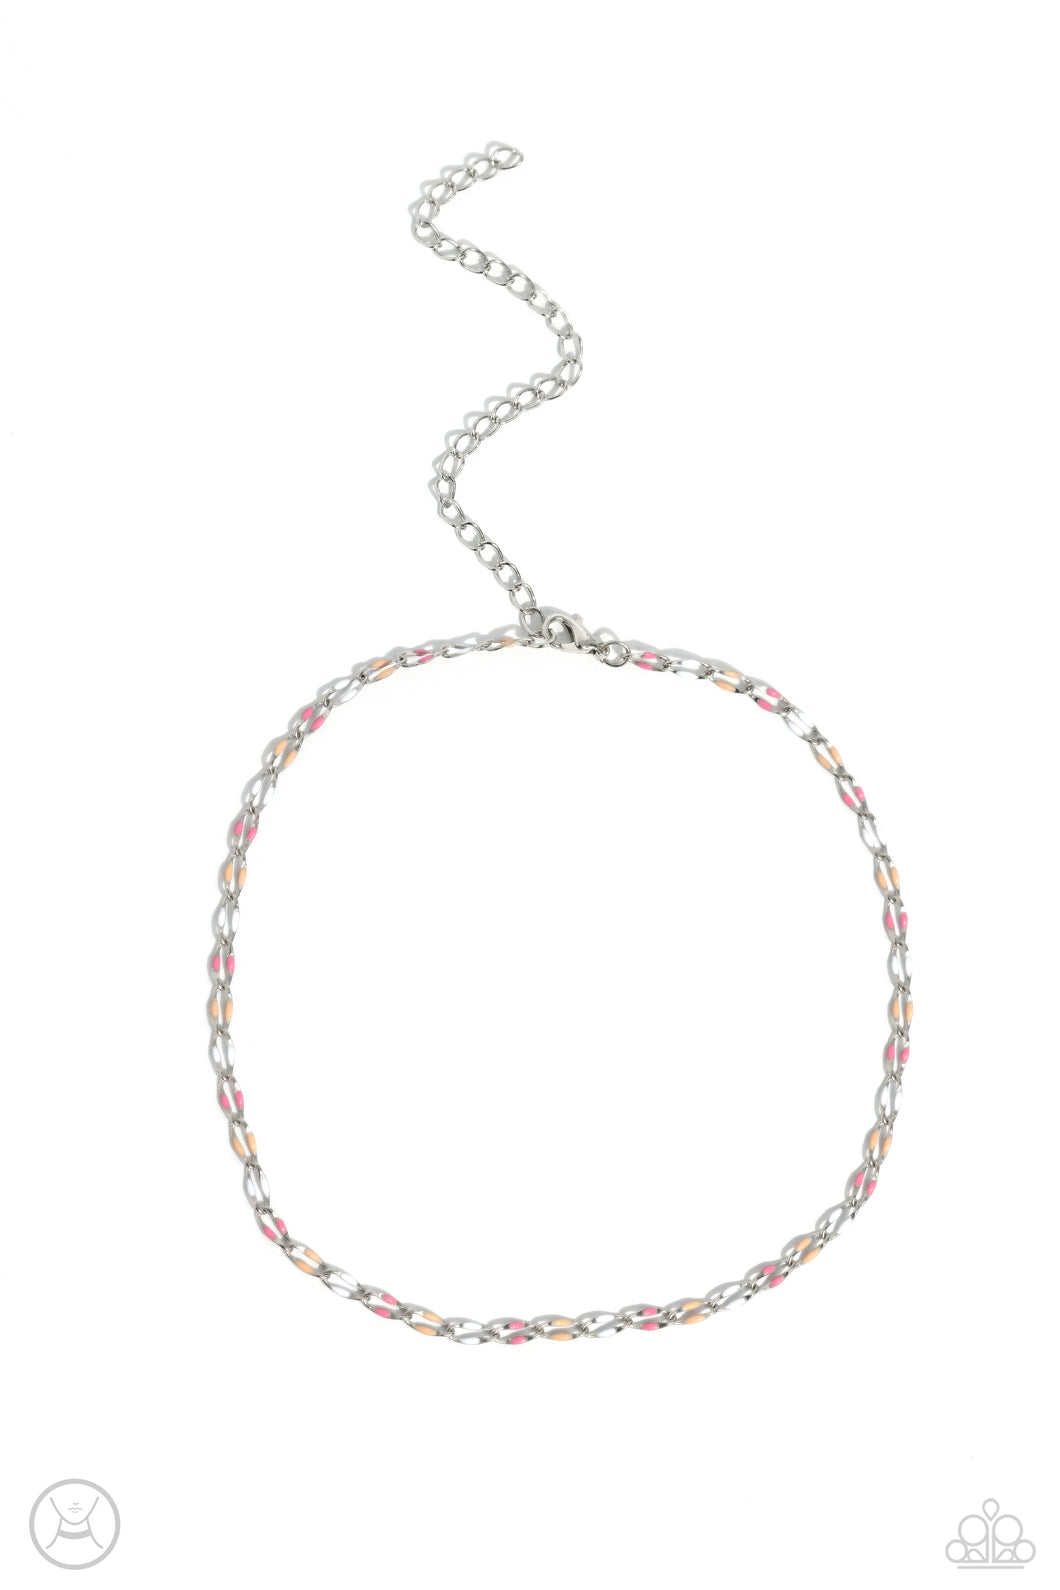 Admirable Accents - Pink Choker Necklace